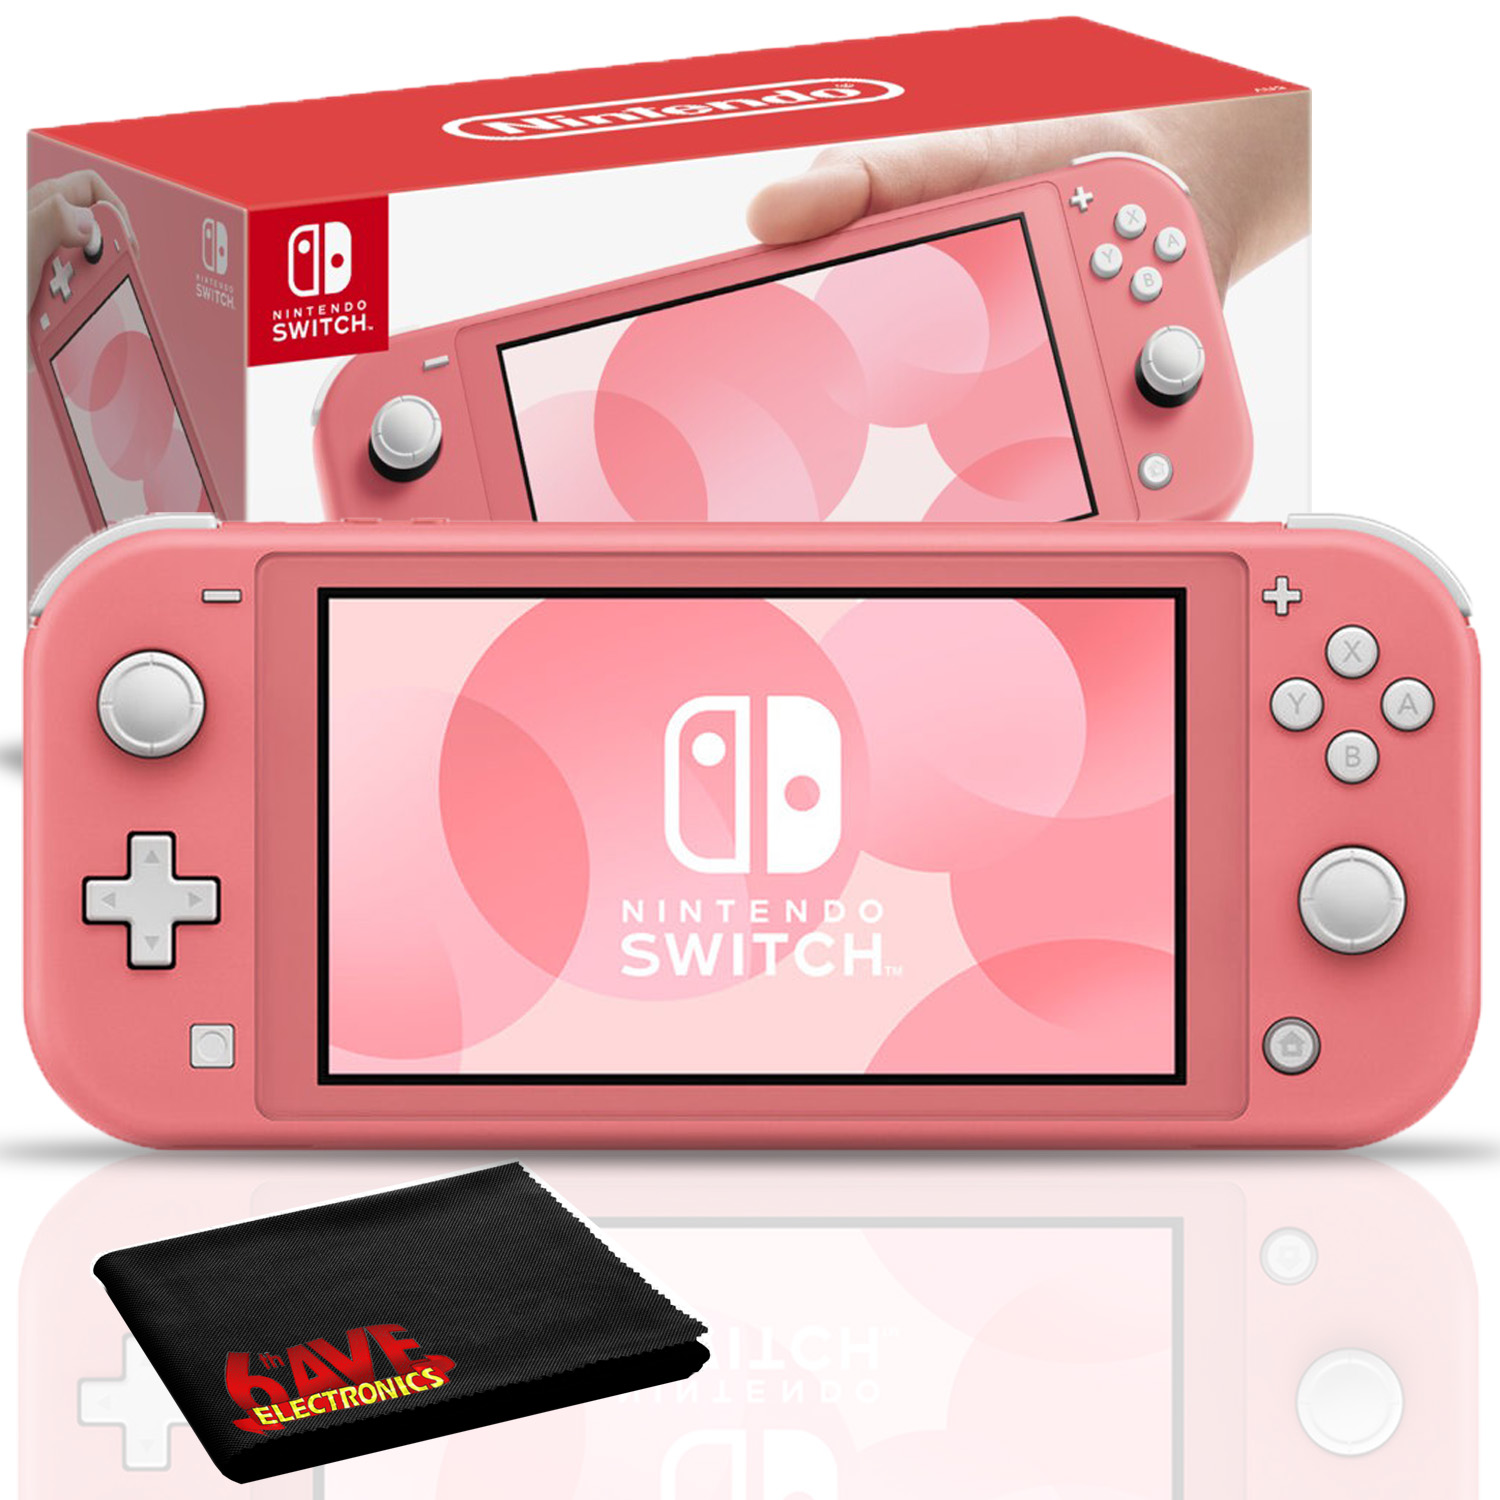 Nintendo Switch Lite (Coral) Console Bundle with Extra Warranty Protection  - Walmart.com